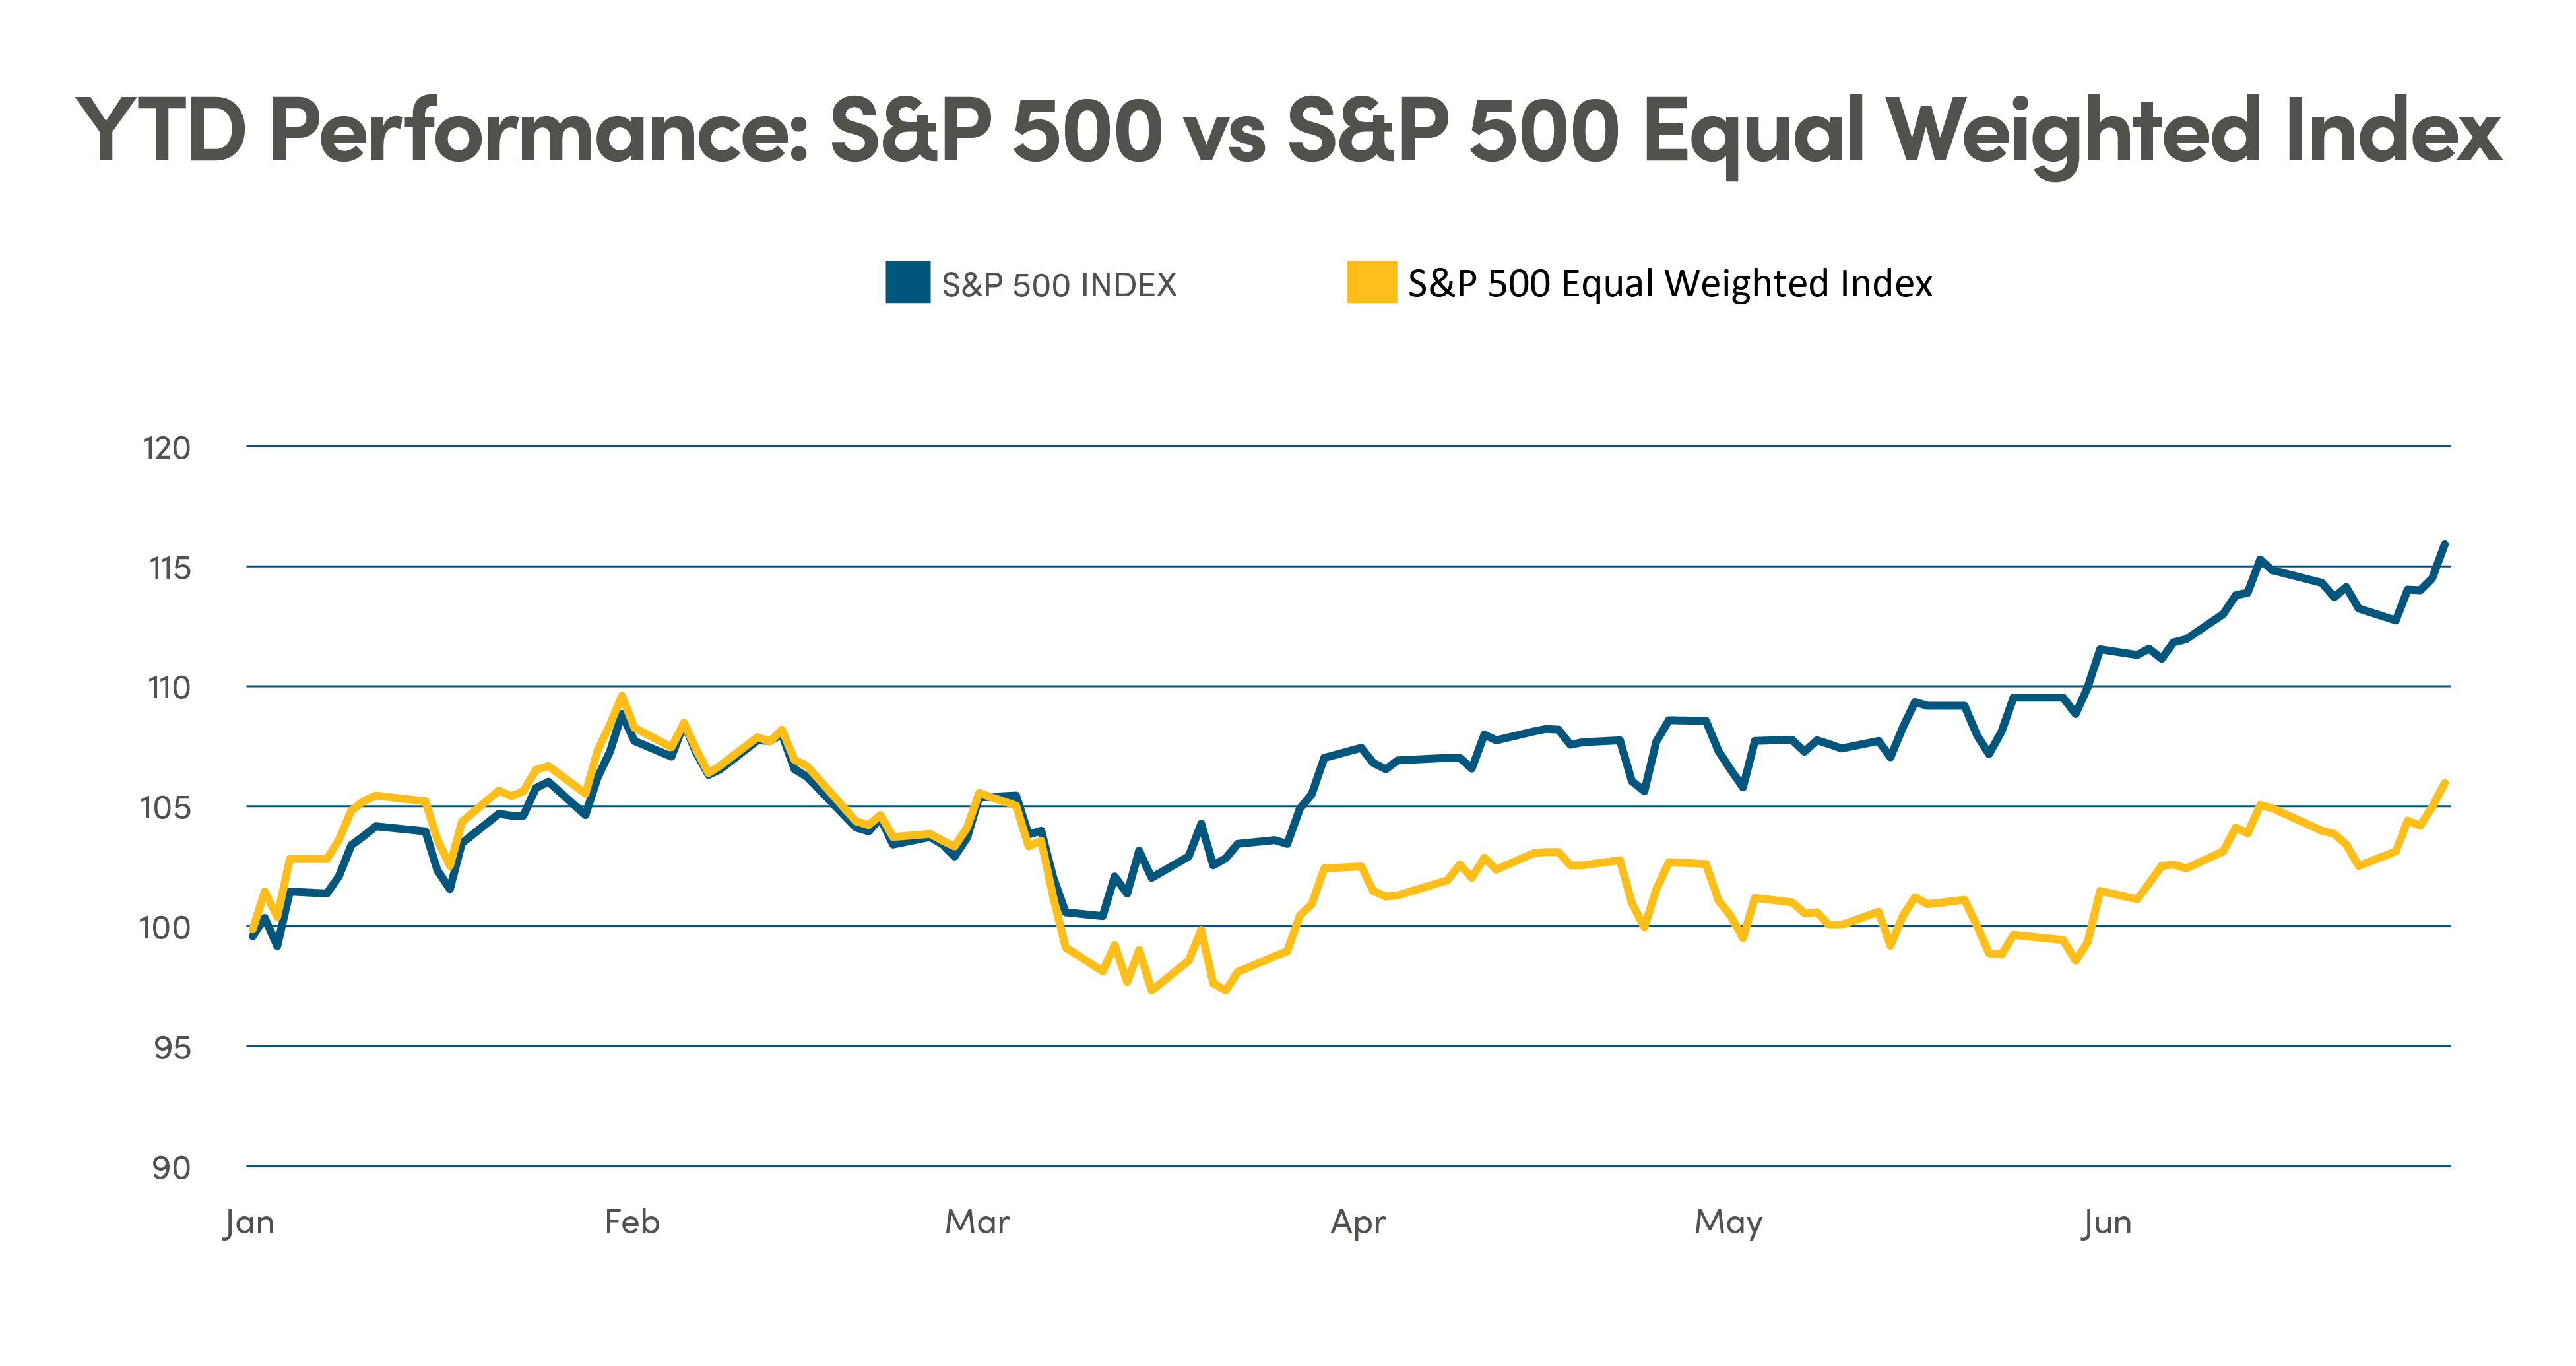 Graph comparing the year to date (January to June) performance of the S&P 500 versus the S&P 500 Equal Weighted index